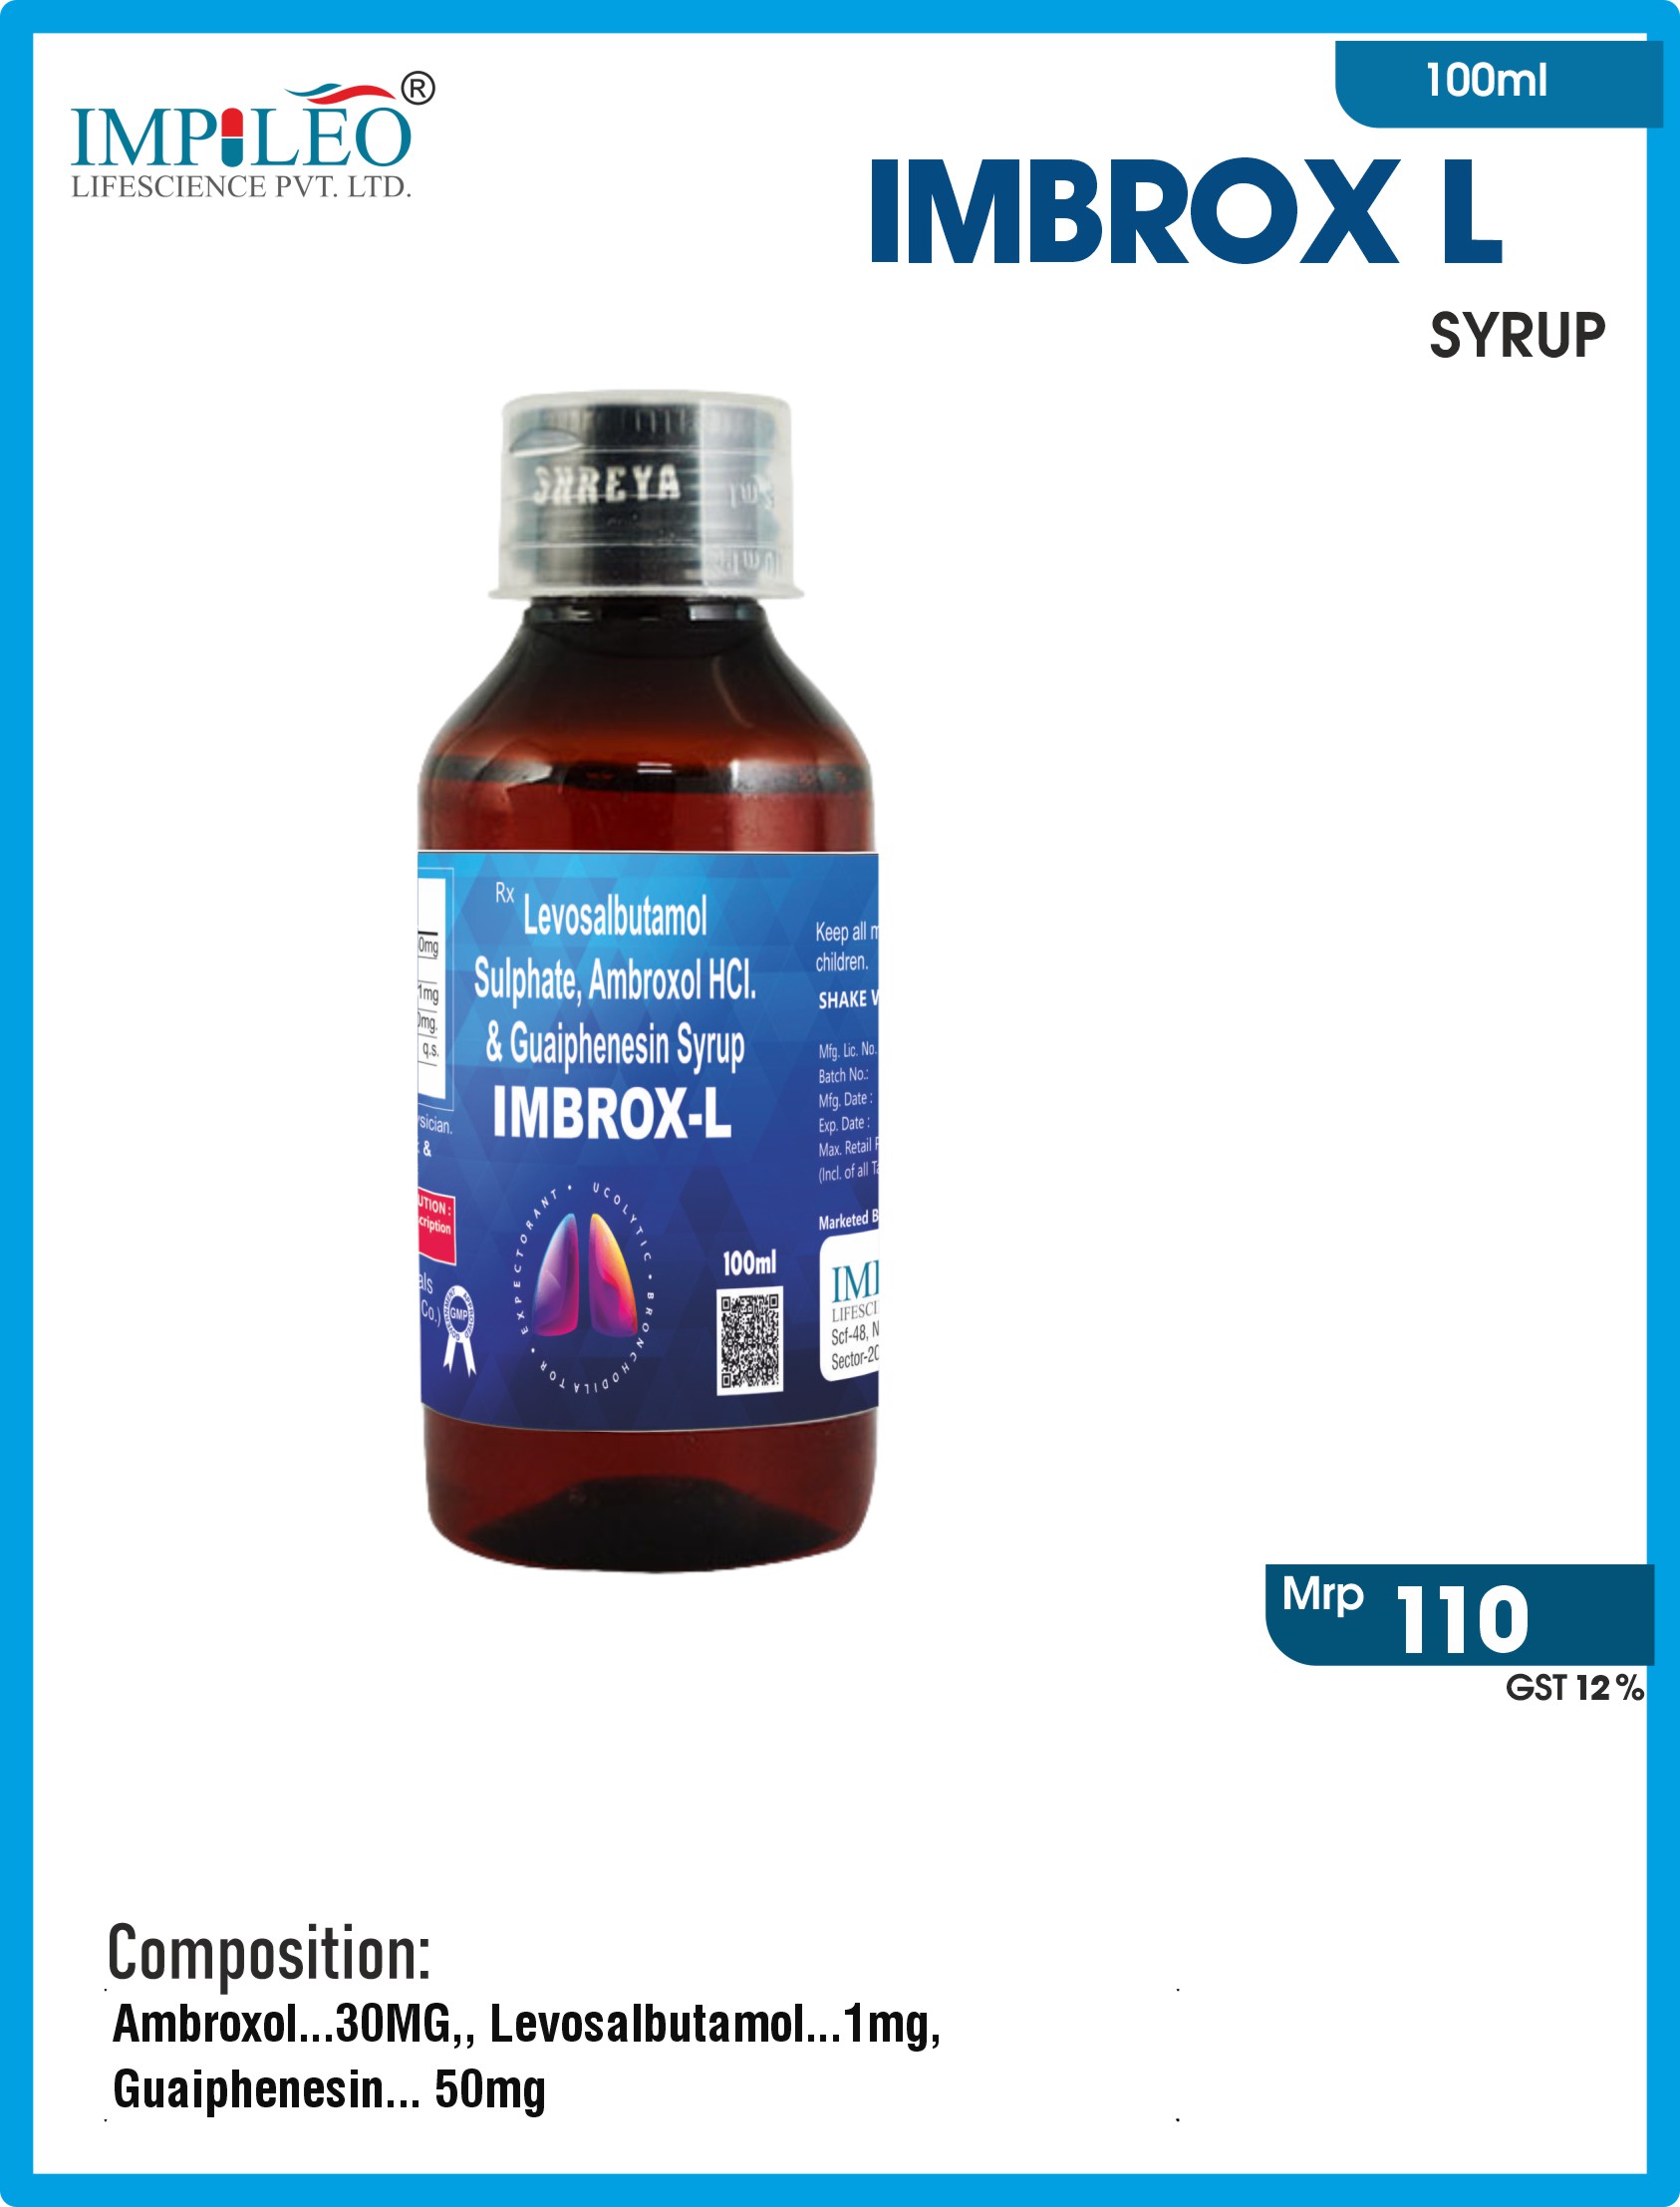 Unlock Superior Respiratory Relief : IMBROX L SYRUP by Premier Third-Party Manufacturer in India